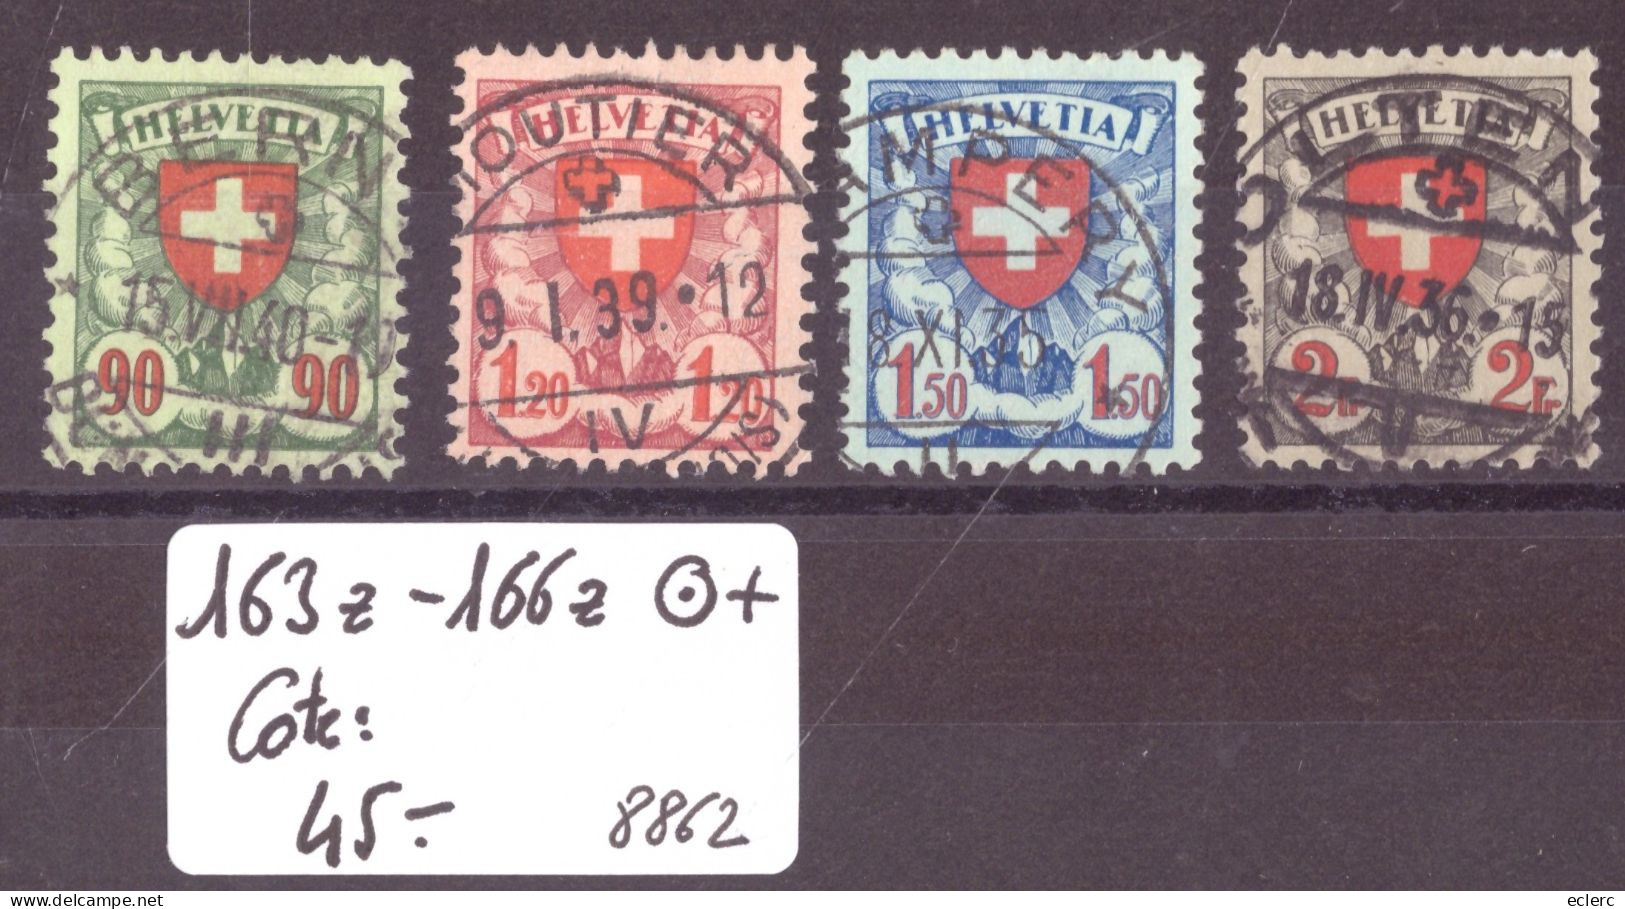 No 163z-166z ( PAPIER GRILLE ) -  OBLITERATIONS CHOISIES - COTE: 45.- - Used Stamps